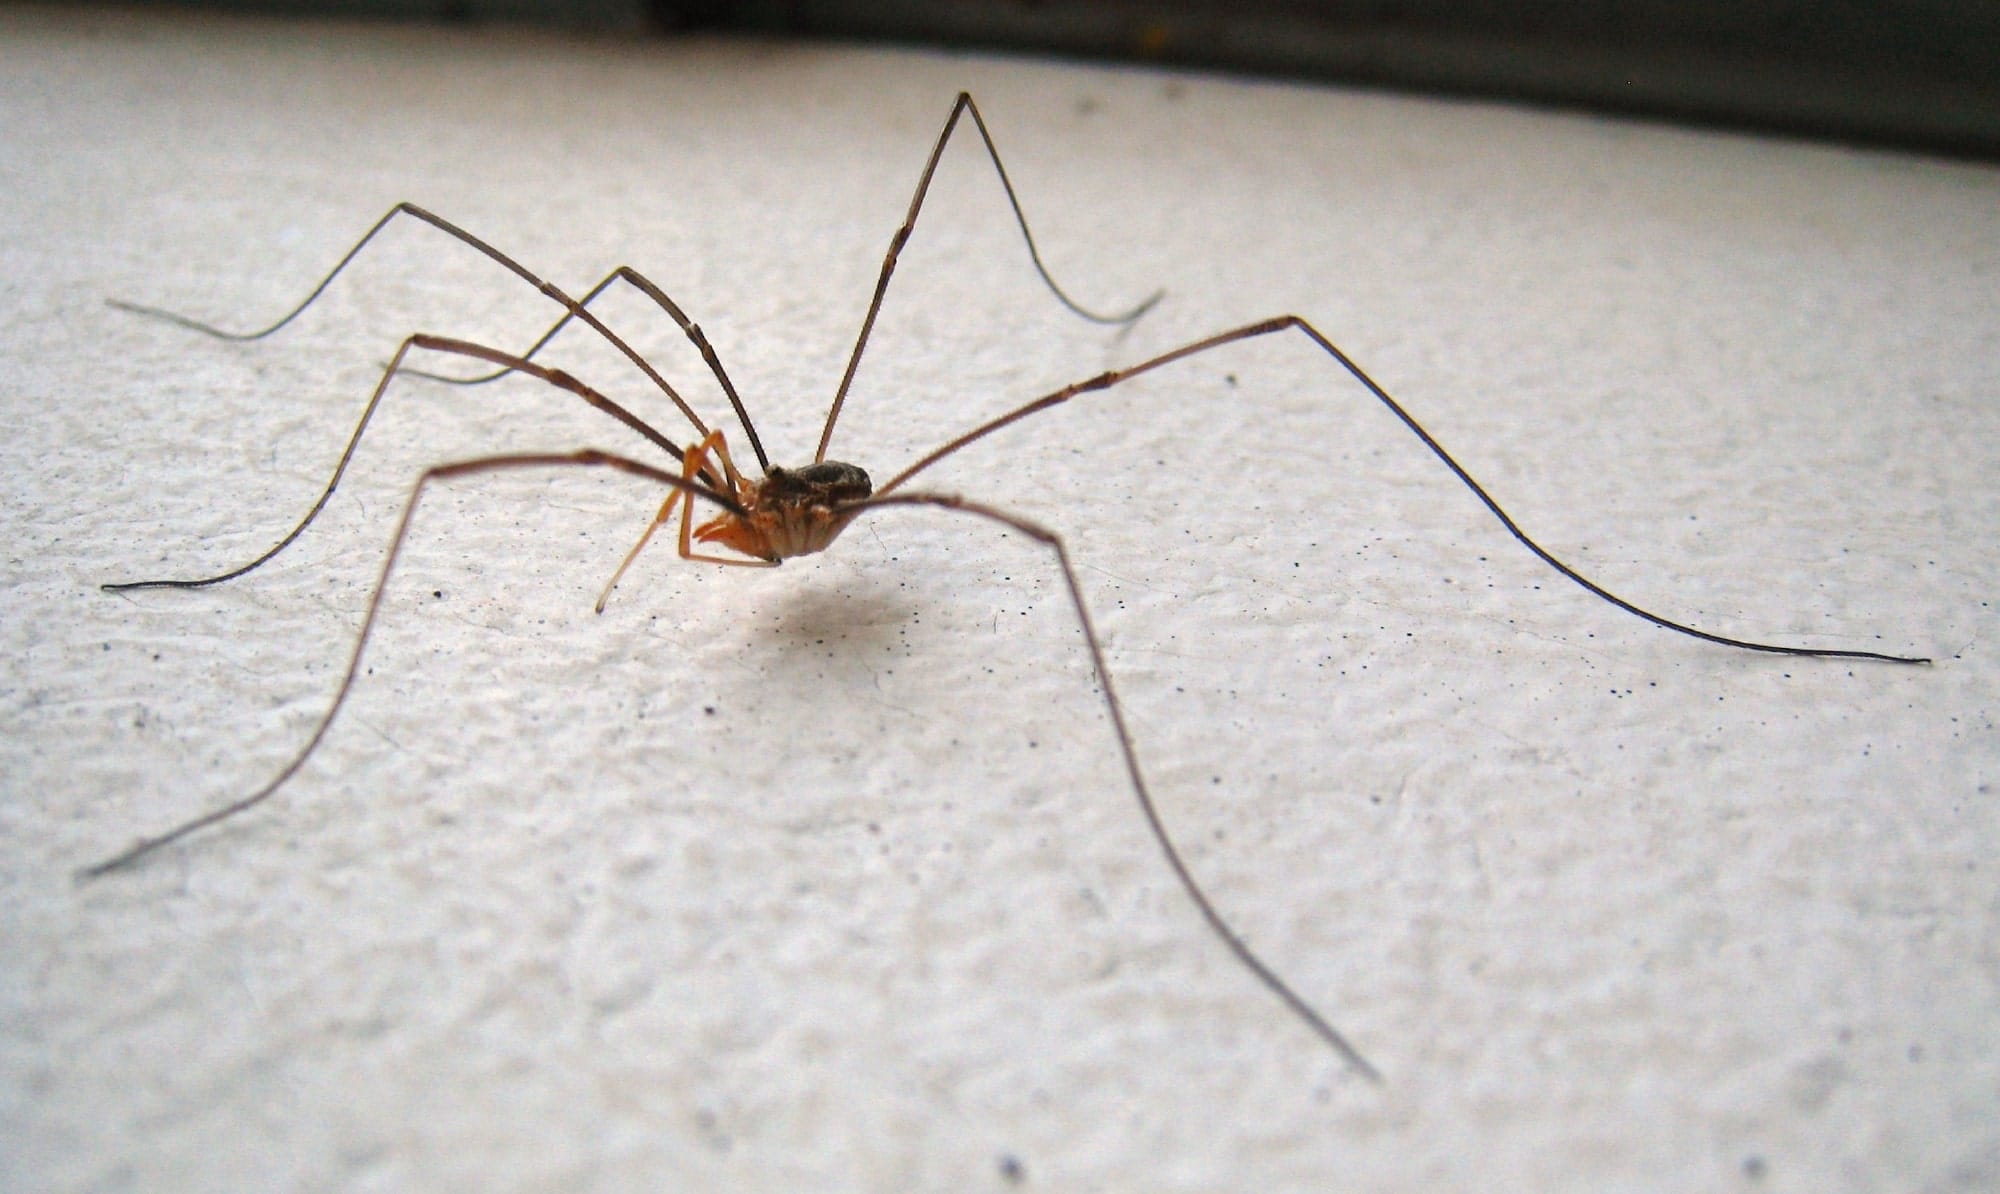 These Skin Crawling Facts About Daddy Longlegs Will Make You Think